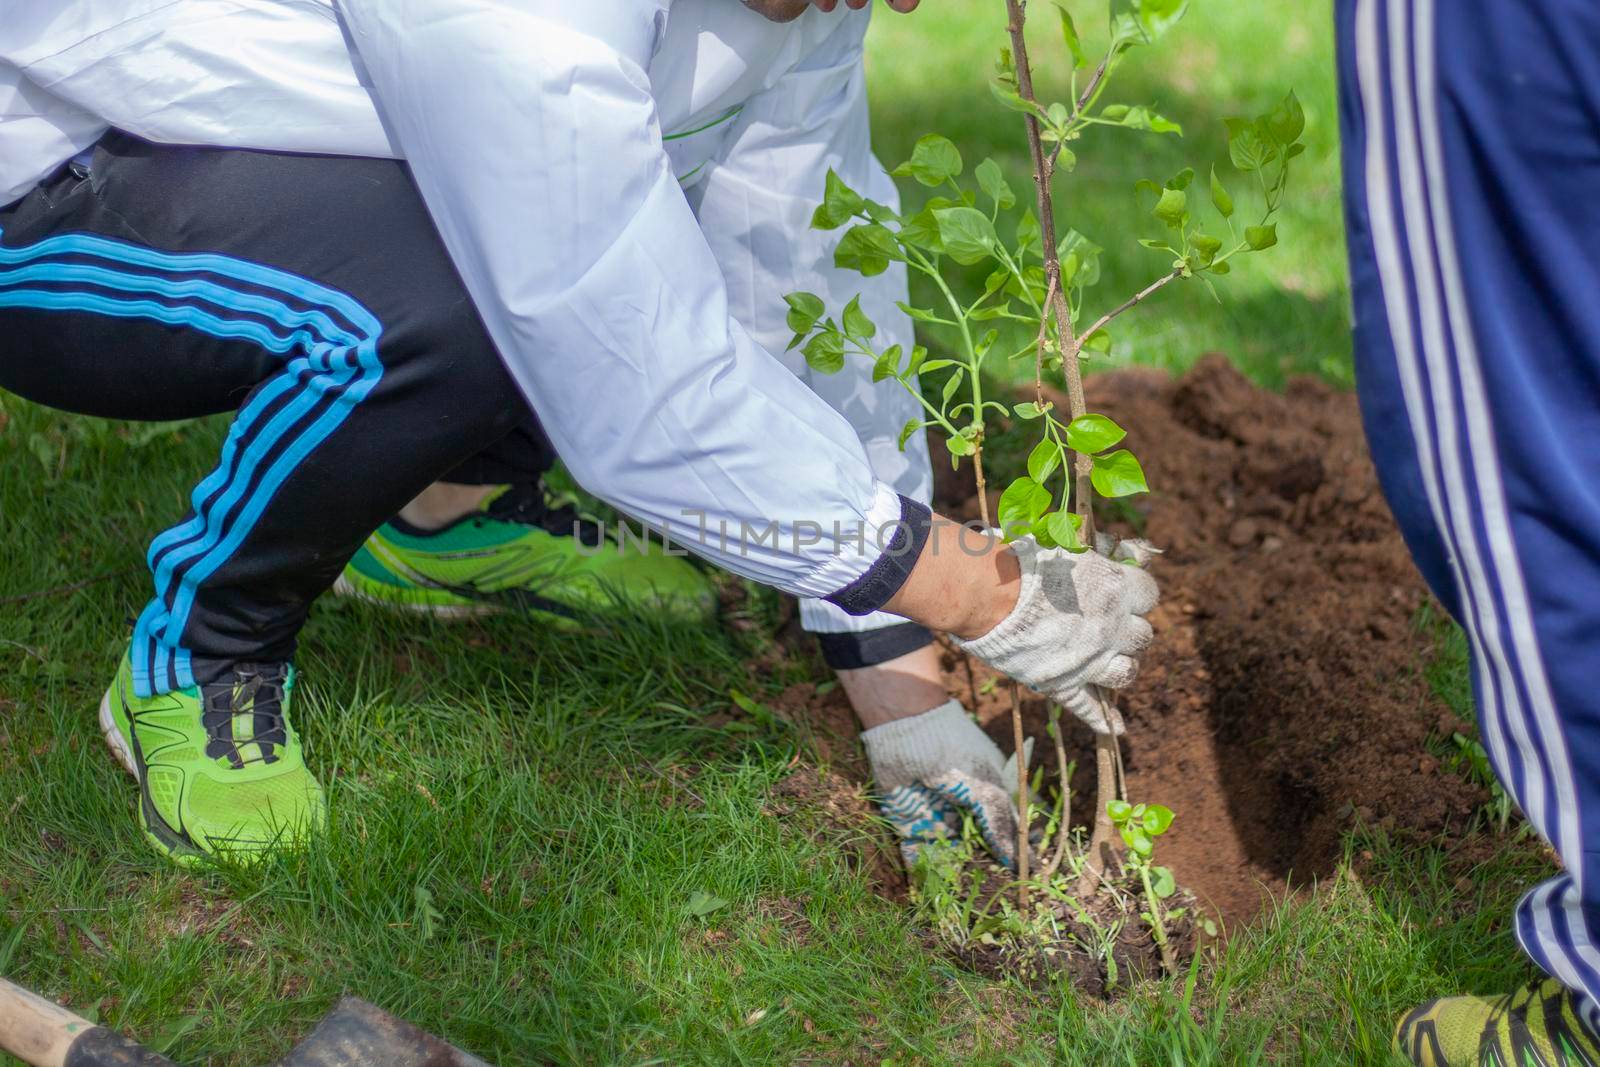 The gardener is planting trees. A gardener with a shovel digs a hole for a seedling. Work in the garden to plant trees in the soil. Reforestation. Nature protection and planting.